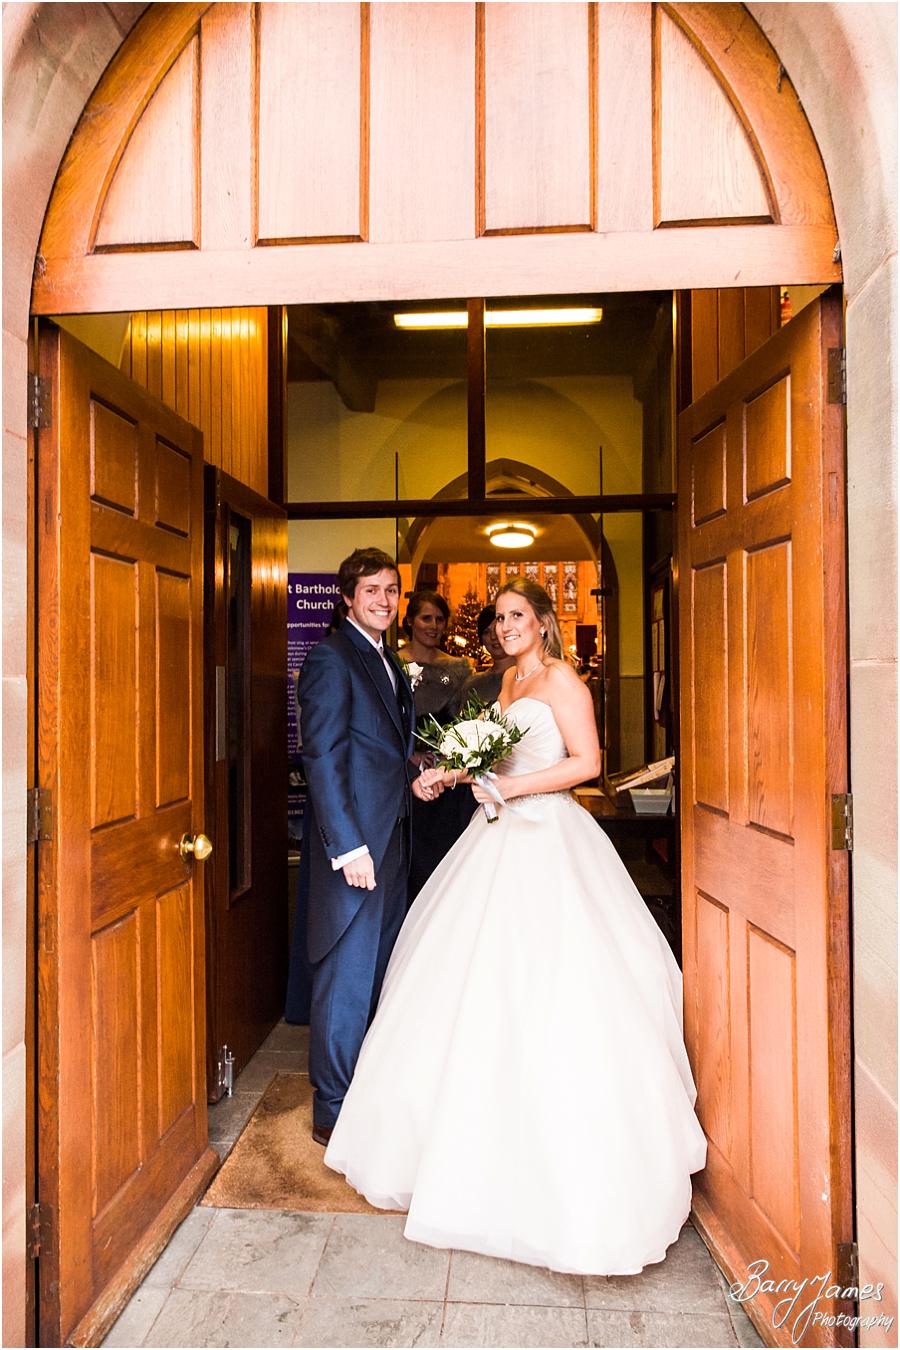 Excited arrivals of the bridal party at St Bartholomews in Penn by Wolverhampton Wedding Photographer Barry James